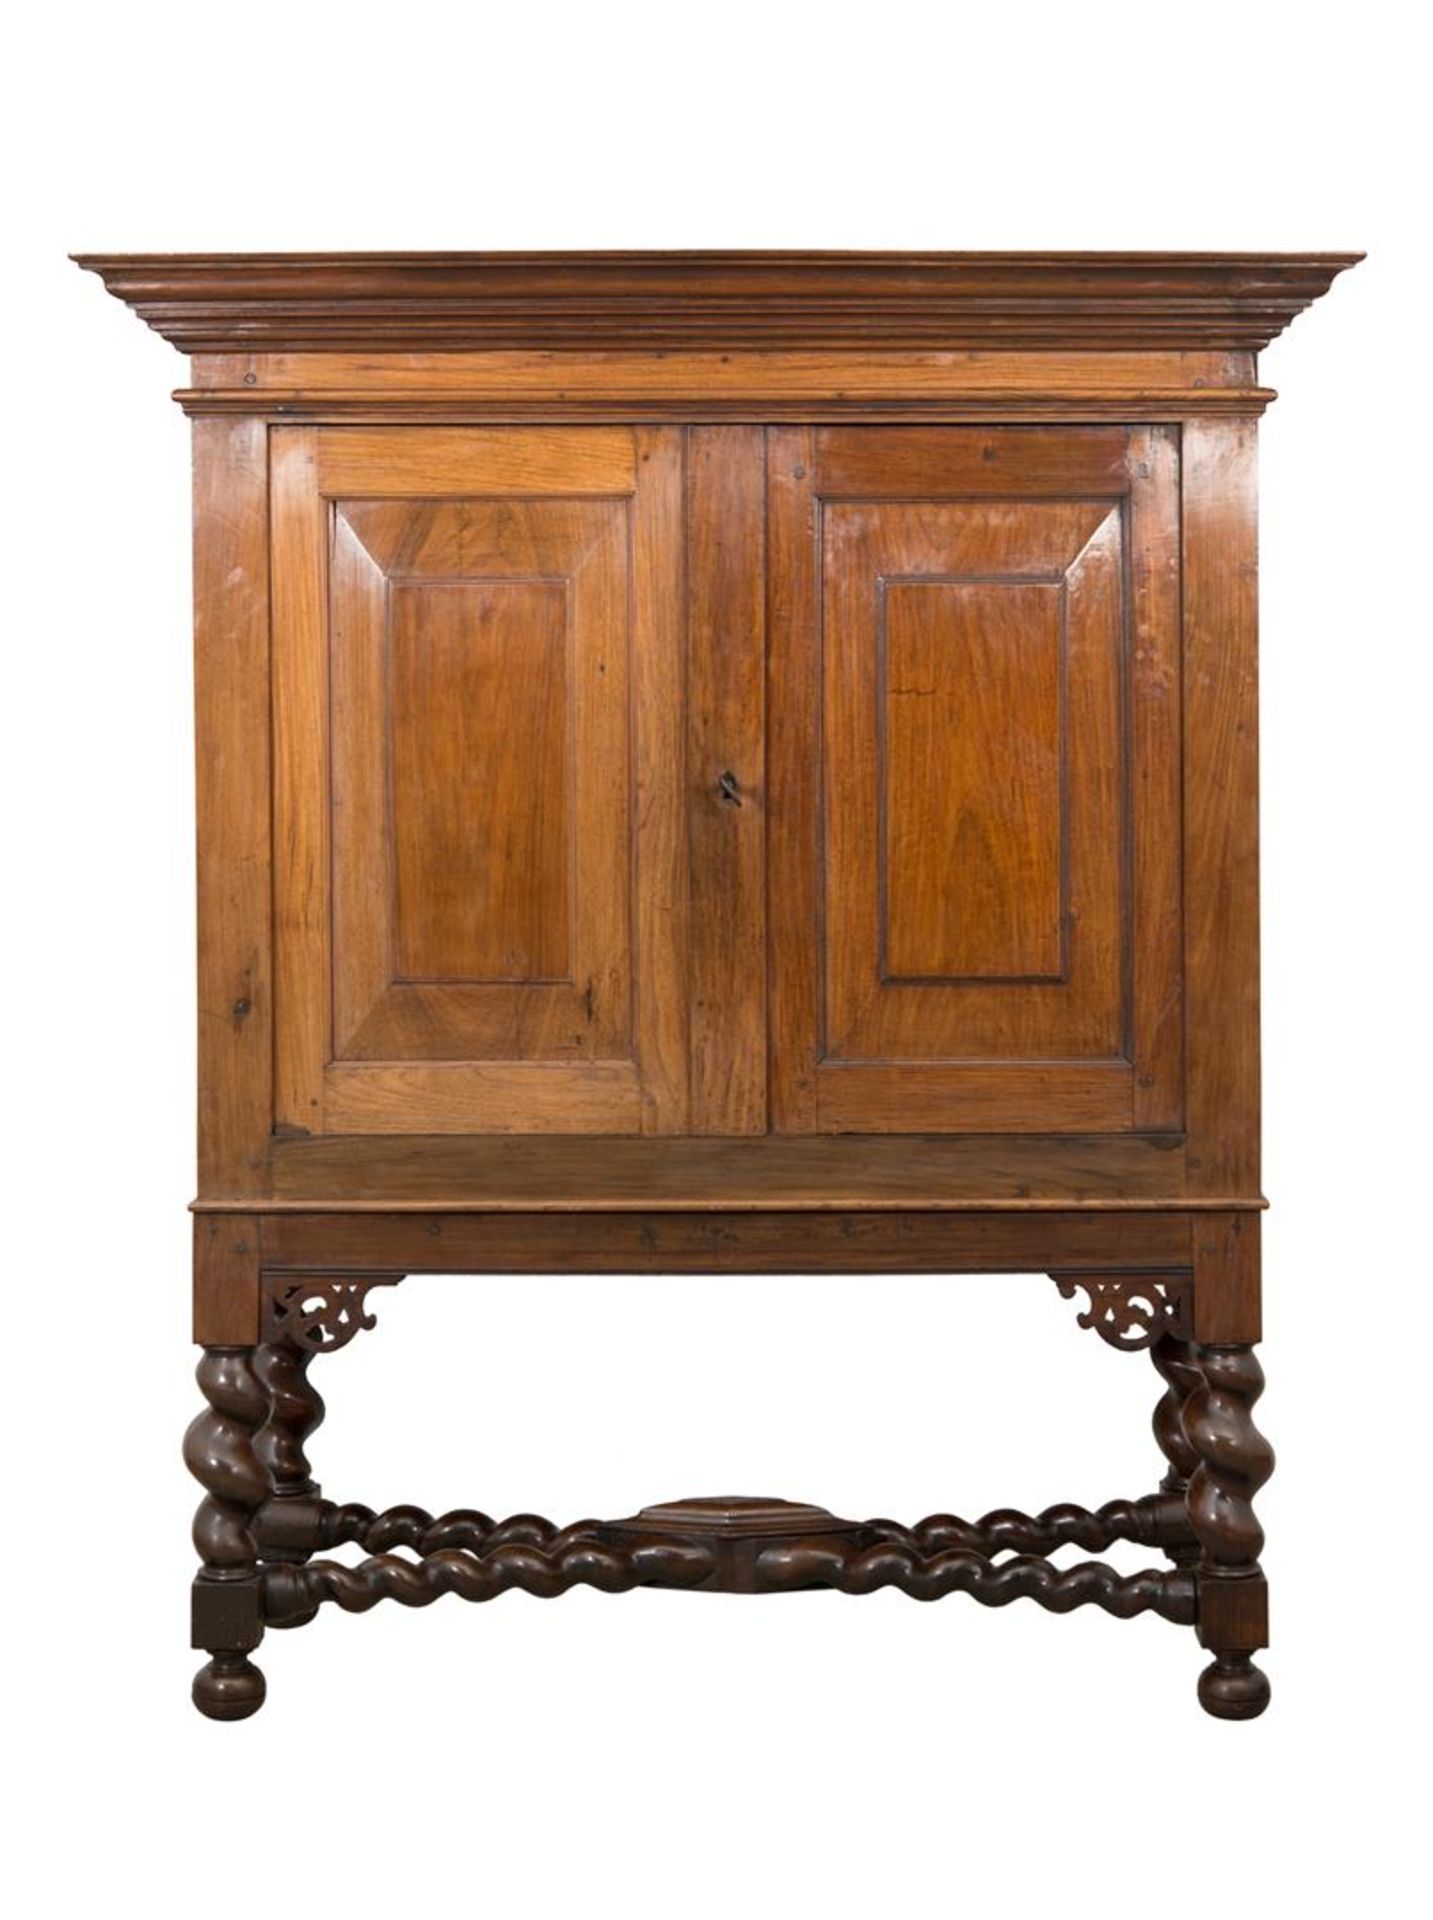 A colonial cabinet on stand, Java, end 17th century.Provenance: ex collection Beltman, The Hague;